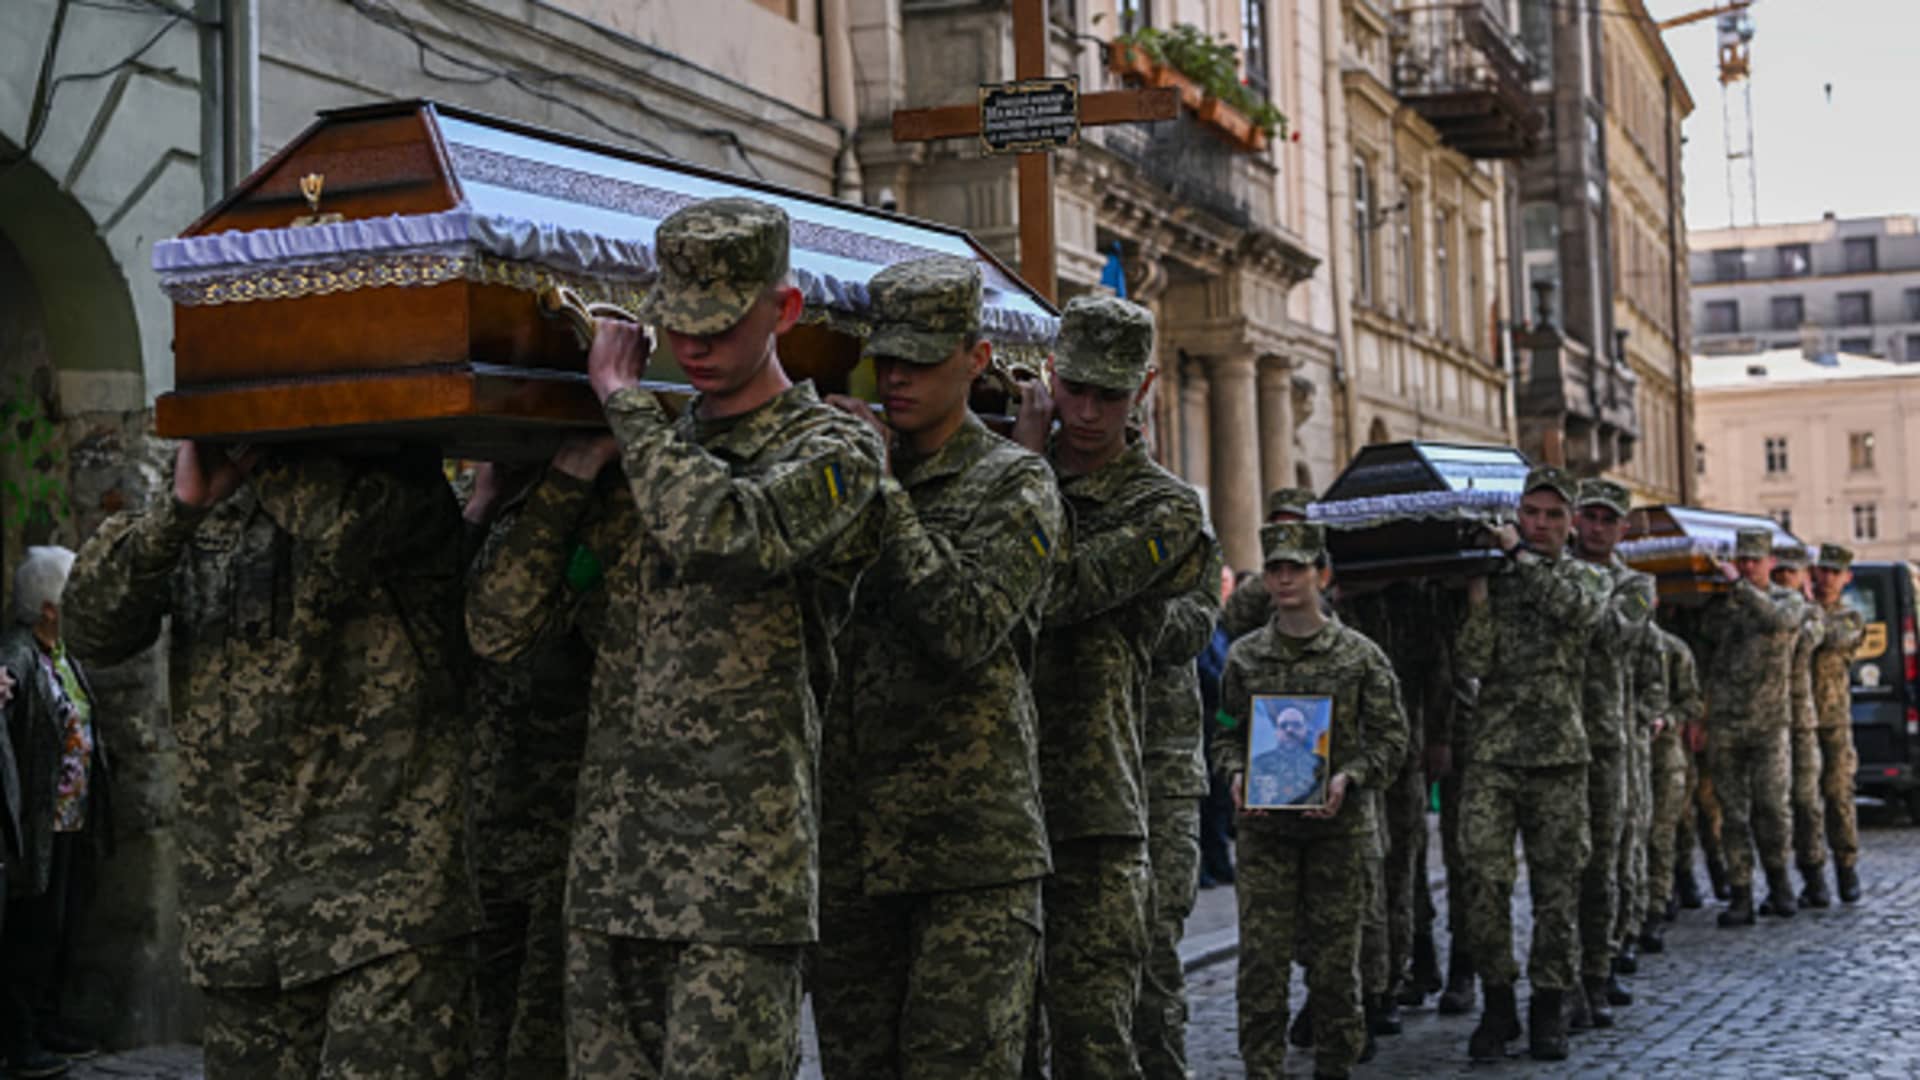 Ukrainian soldiers carry the coffins of Yuri Samofalov, Yuriy Varyanytsya and Alexander Malevsky, 3 Ukrainian soldiers who fallen during the fights against Russia as they arrive at the Church of the Most Holy Apostles Peter and Paul in Lviv, Ukraine on May 06, 2022.